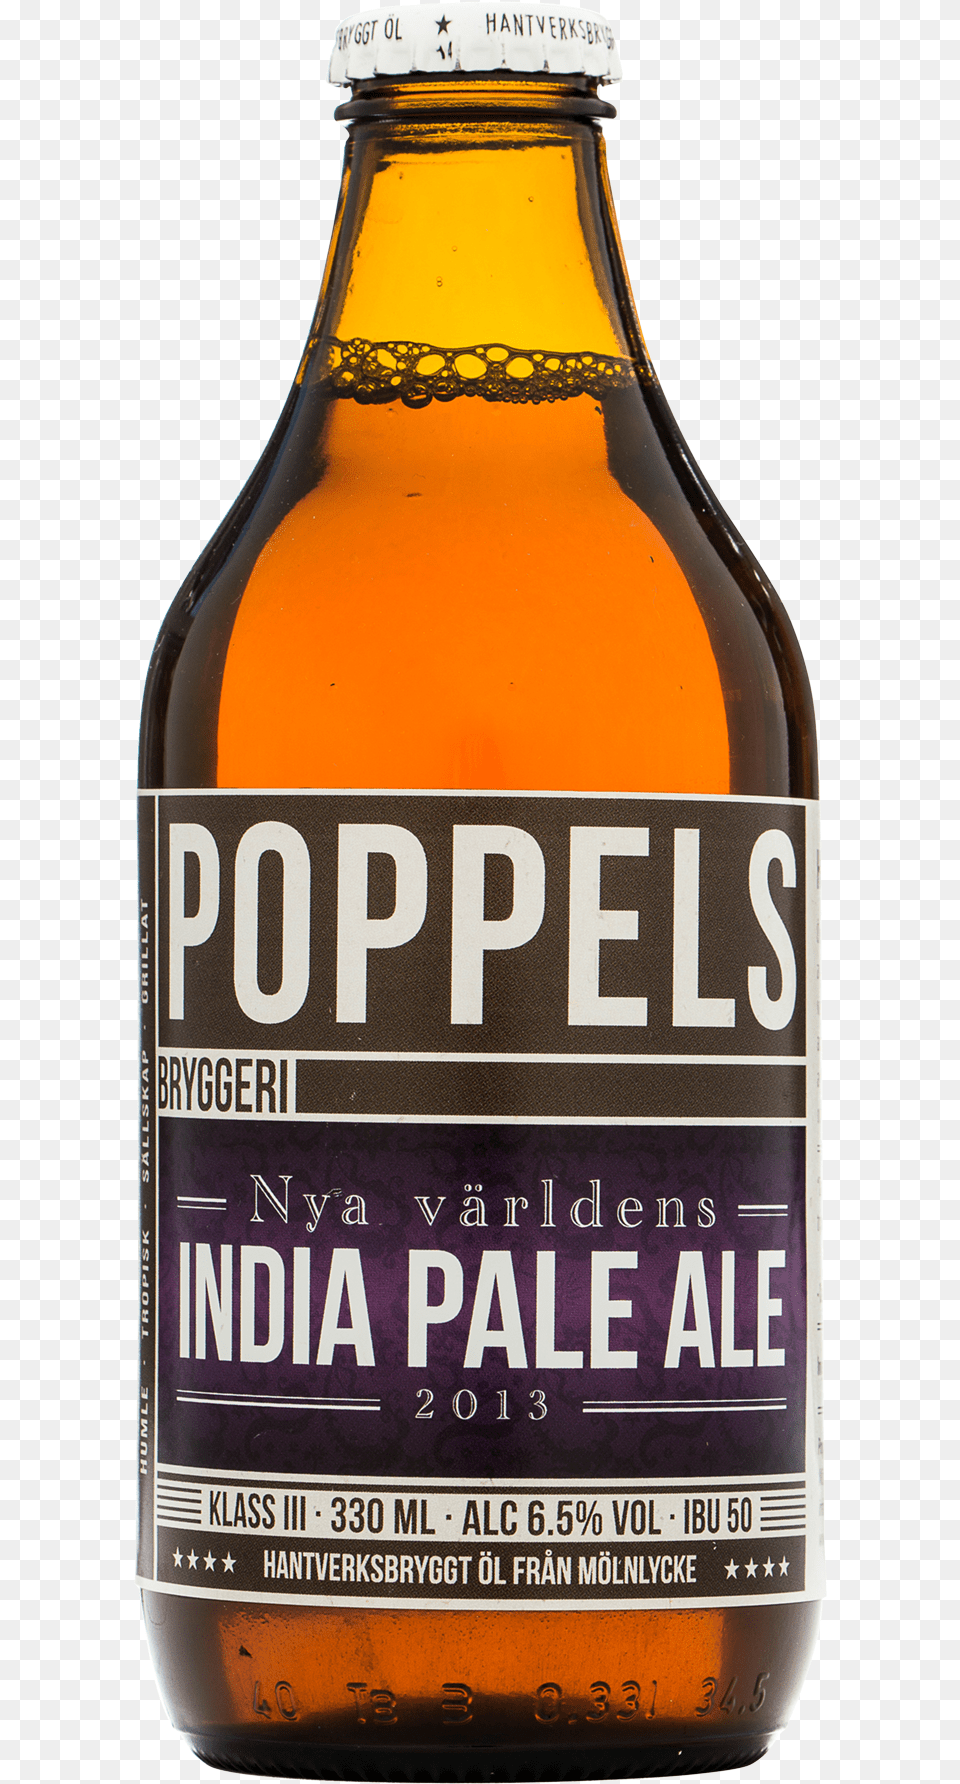 The New World India Pale Ale Poppelmans Nya Vrldens India Pale Ale, Alcohol, Beer, Beer Bottle, Beverage Png